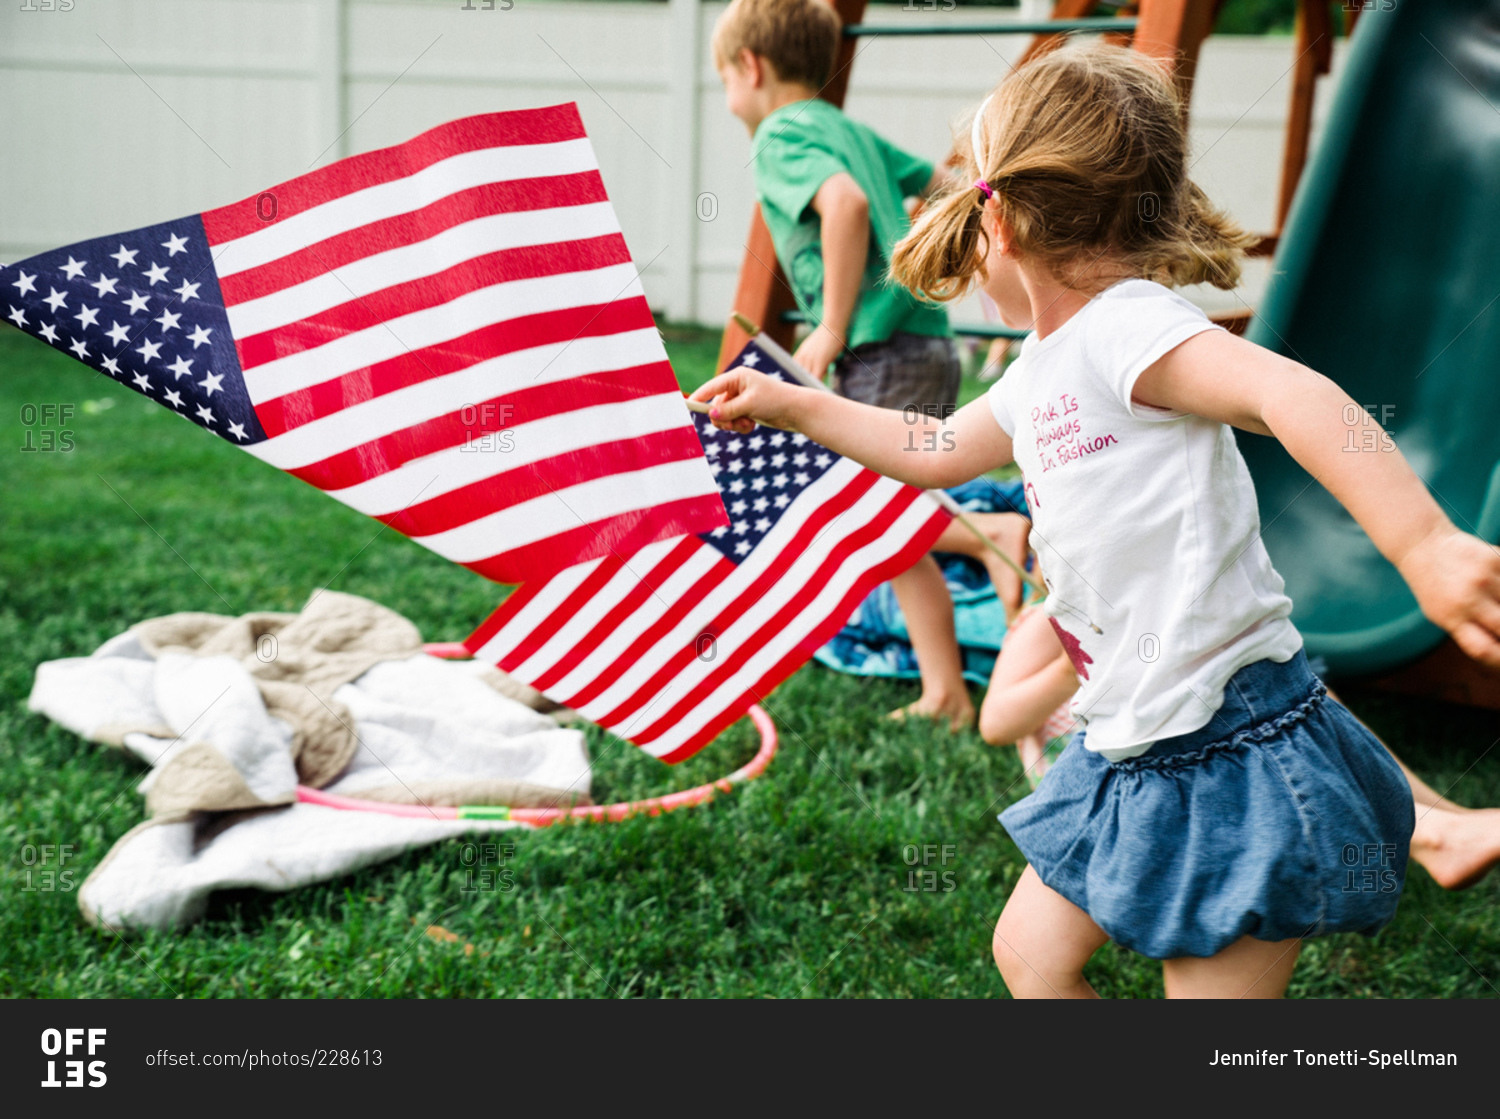 Children running in backyard with American flags